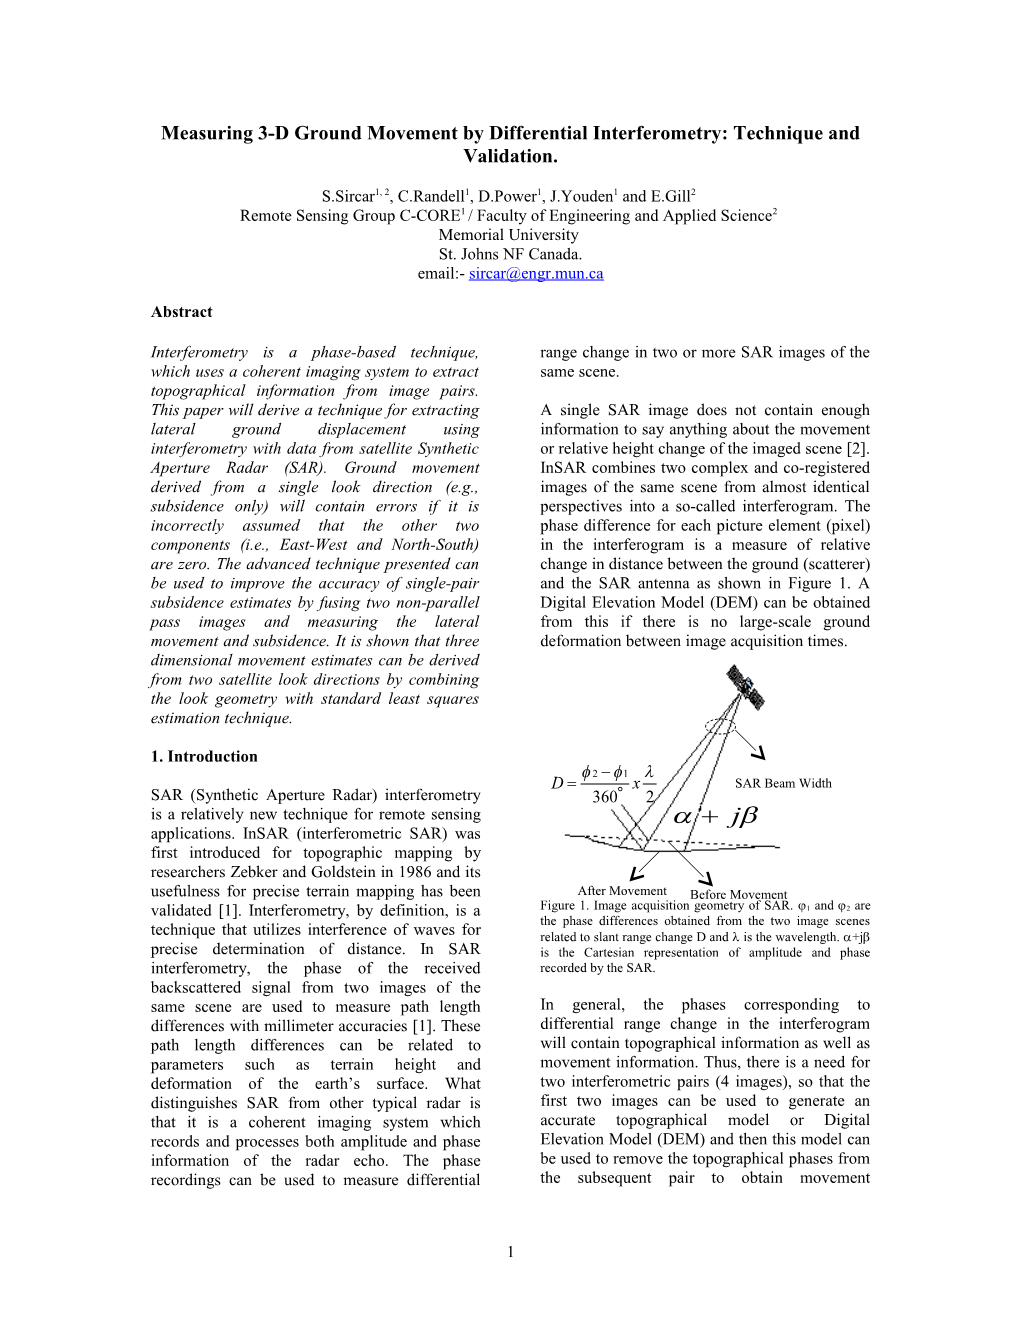 Measuring 3-D Ground Movement from Differential Interferometry: Technique and Validation